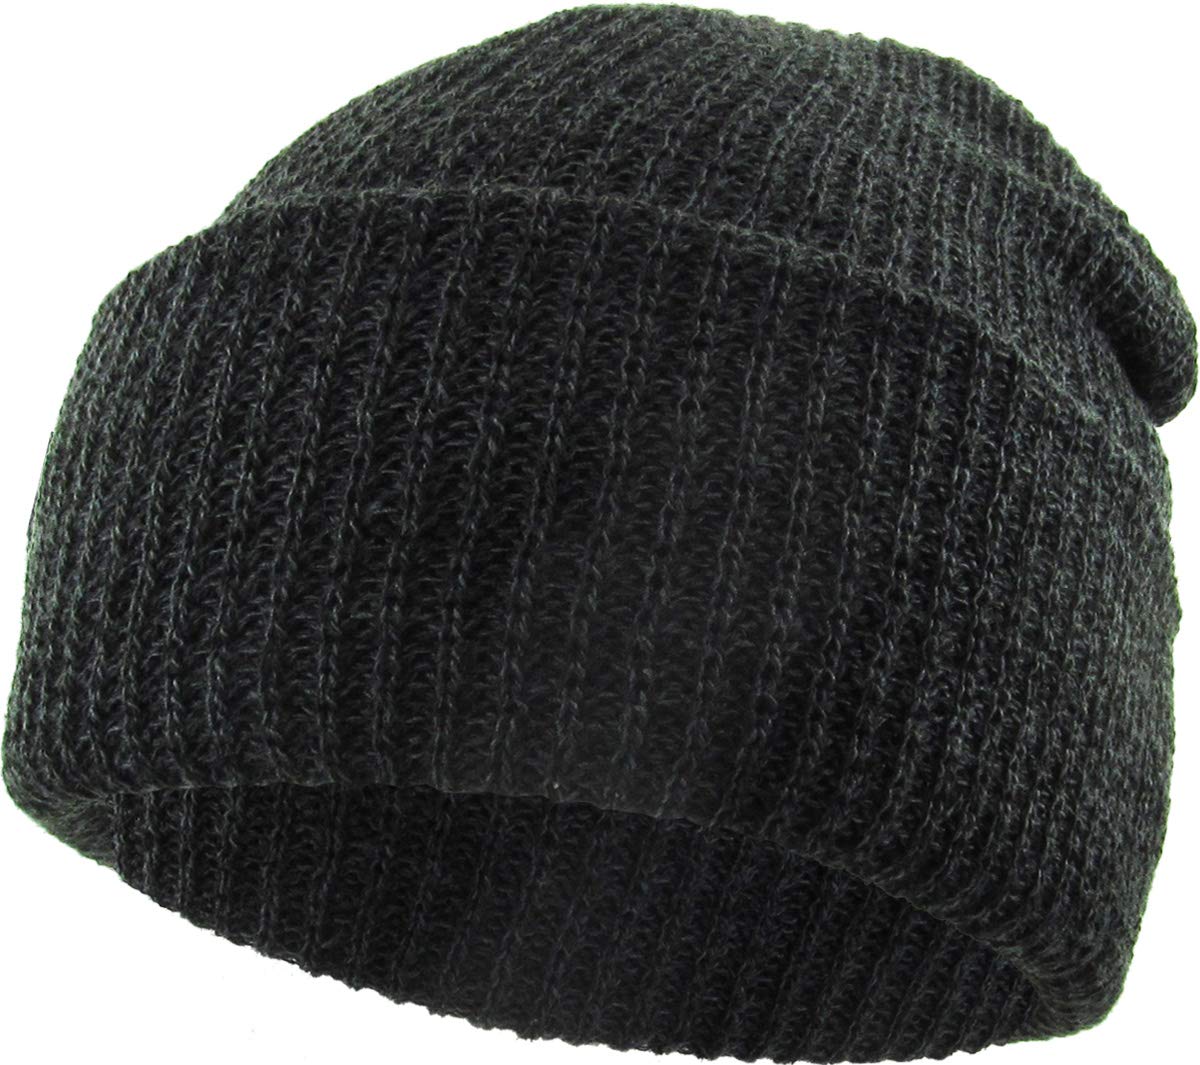 KBETHOS Comfortable Soft Daily Slouchy Beanie Collection Winter Ski Baggy Hat Unisex Various Styles